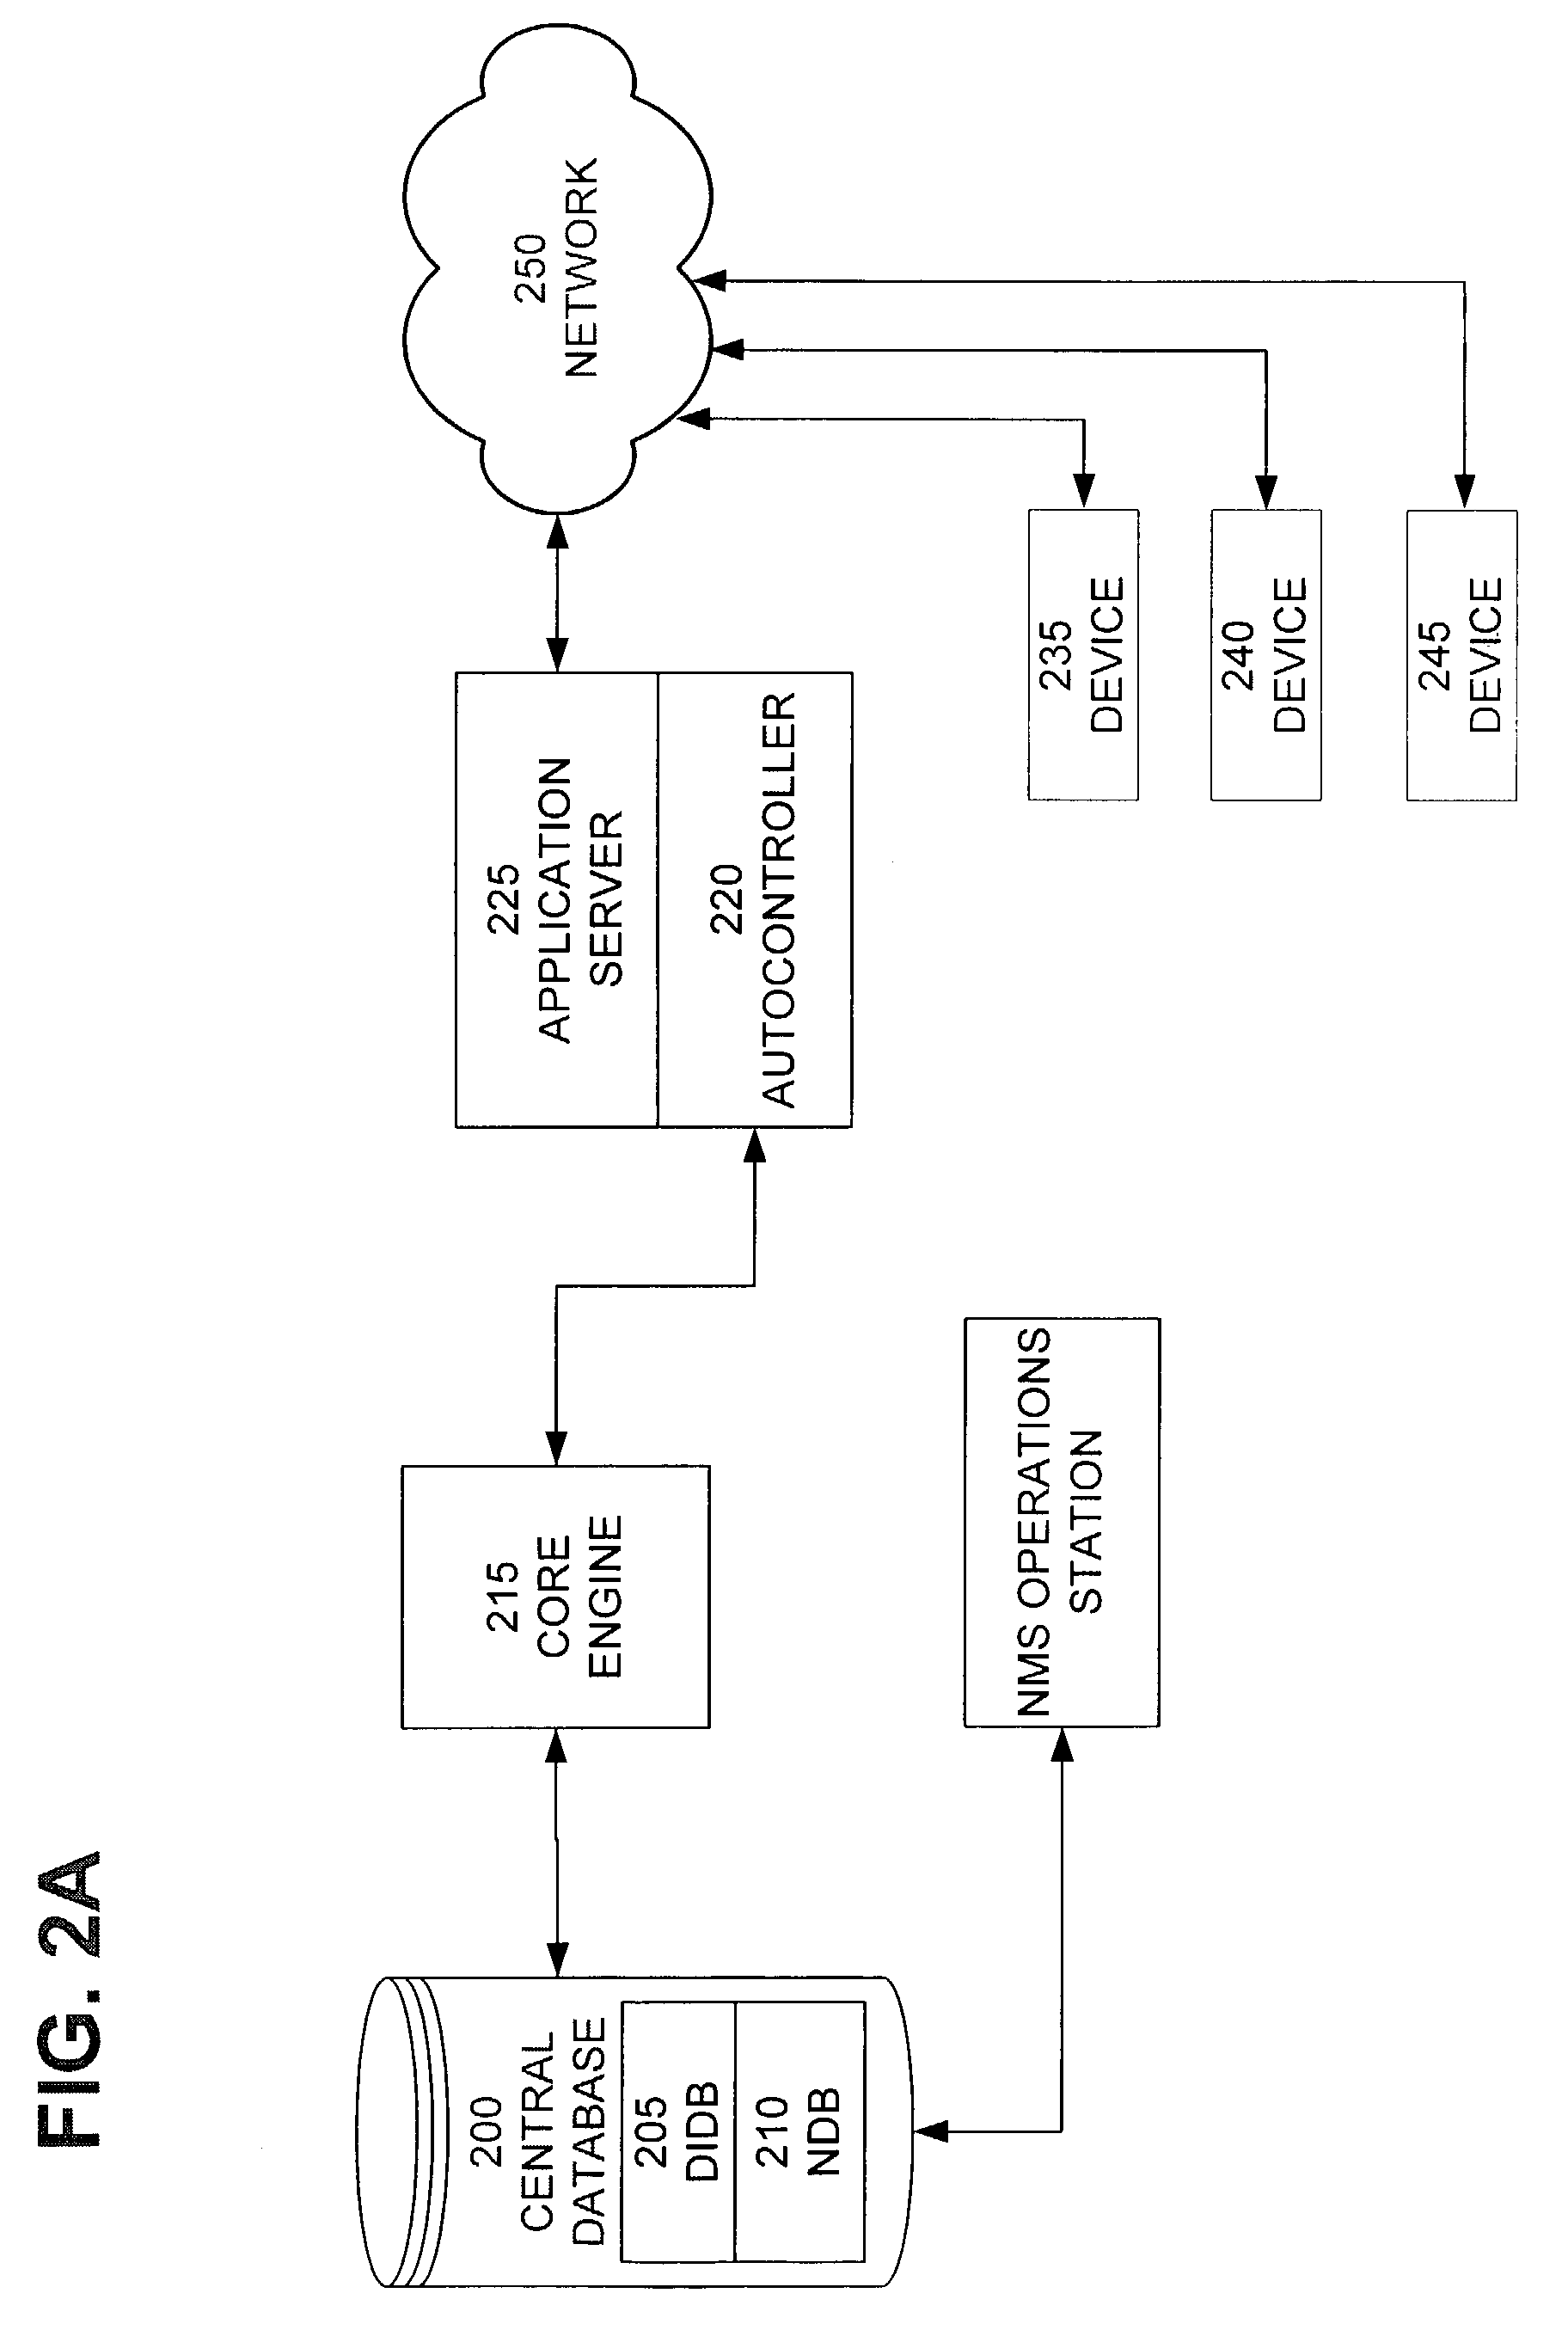 System and method for synchronizing the configuration of distributed network management applications